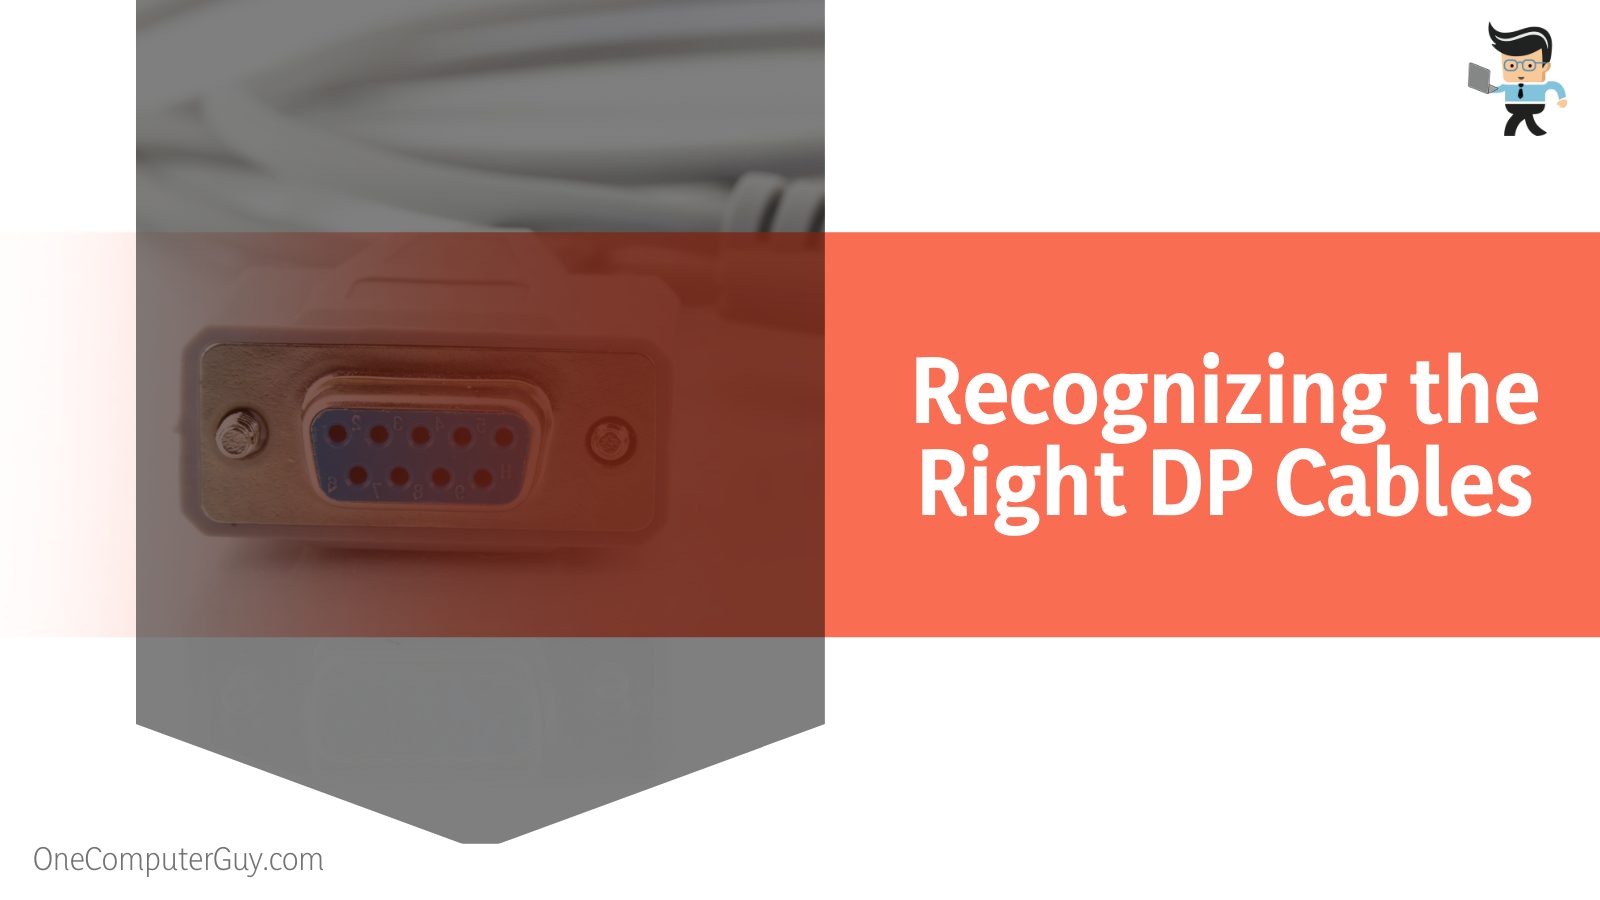 Recognizing the Right DP Cables